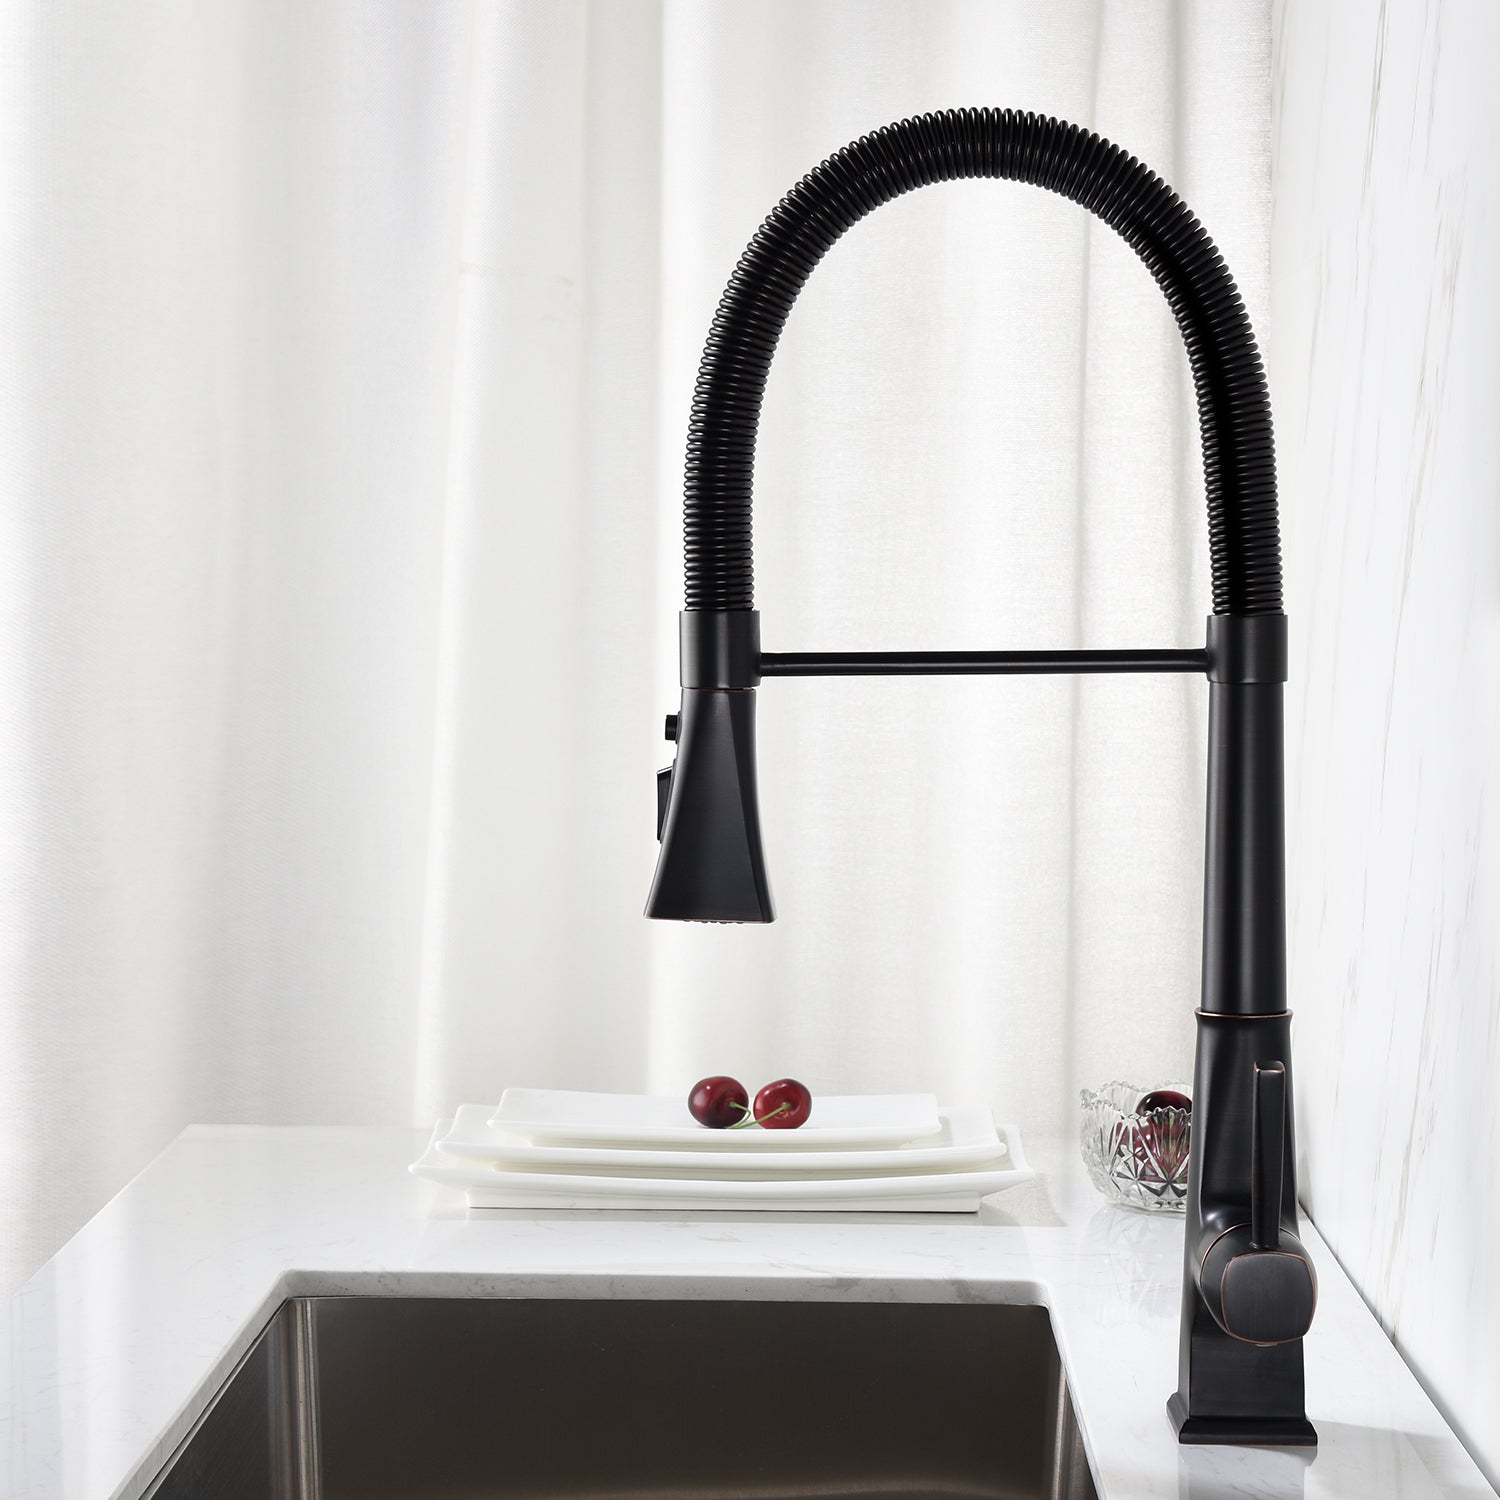 Single Handle Pull Down Sprayer Kitchen Sink Faucet